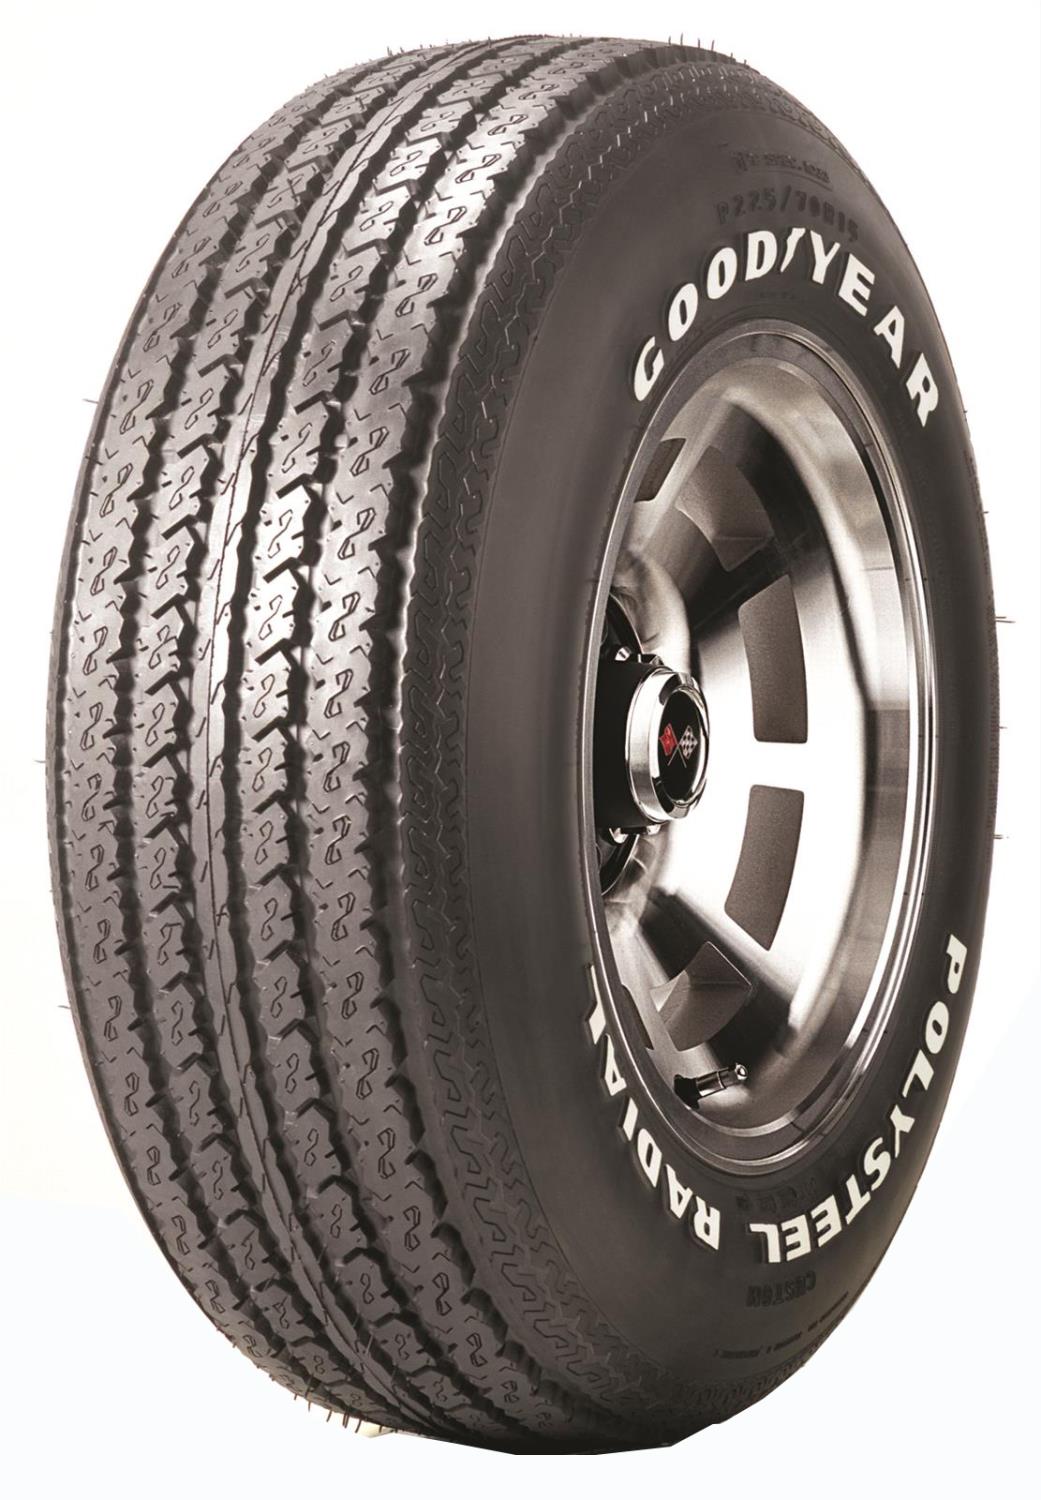 P3AC2 - Goodyear Collector Series Polysteel Radial Tire - P225/70R15